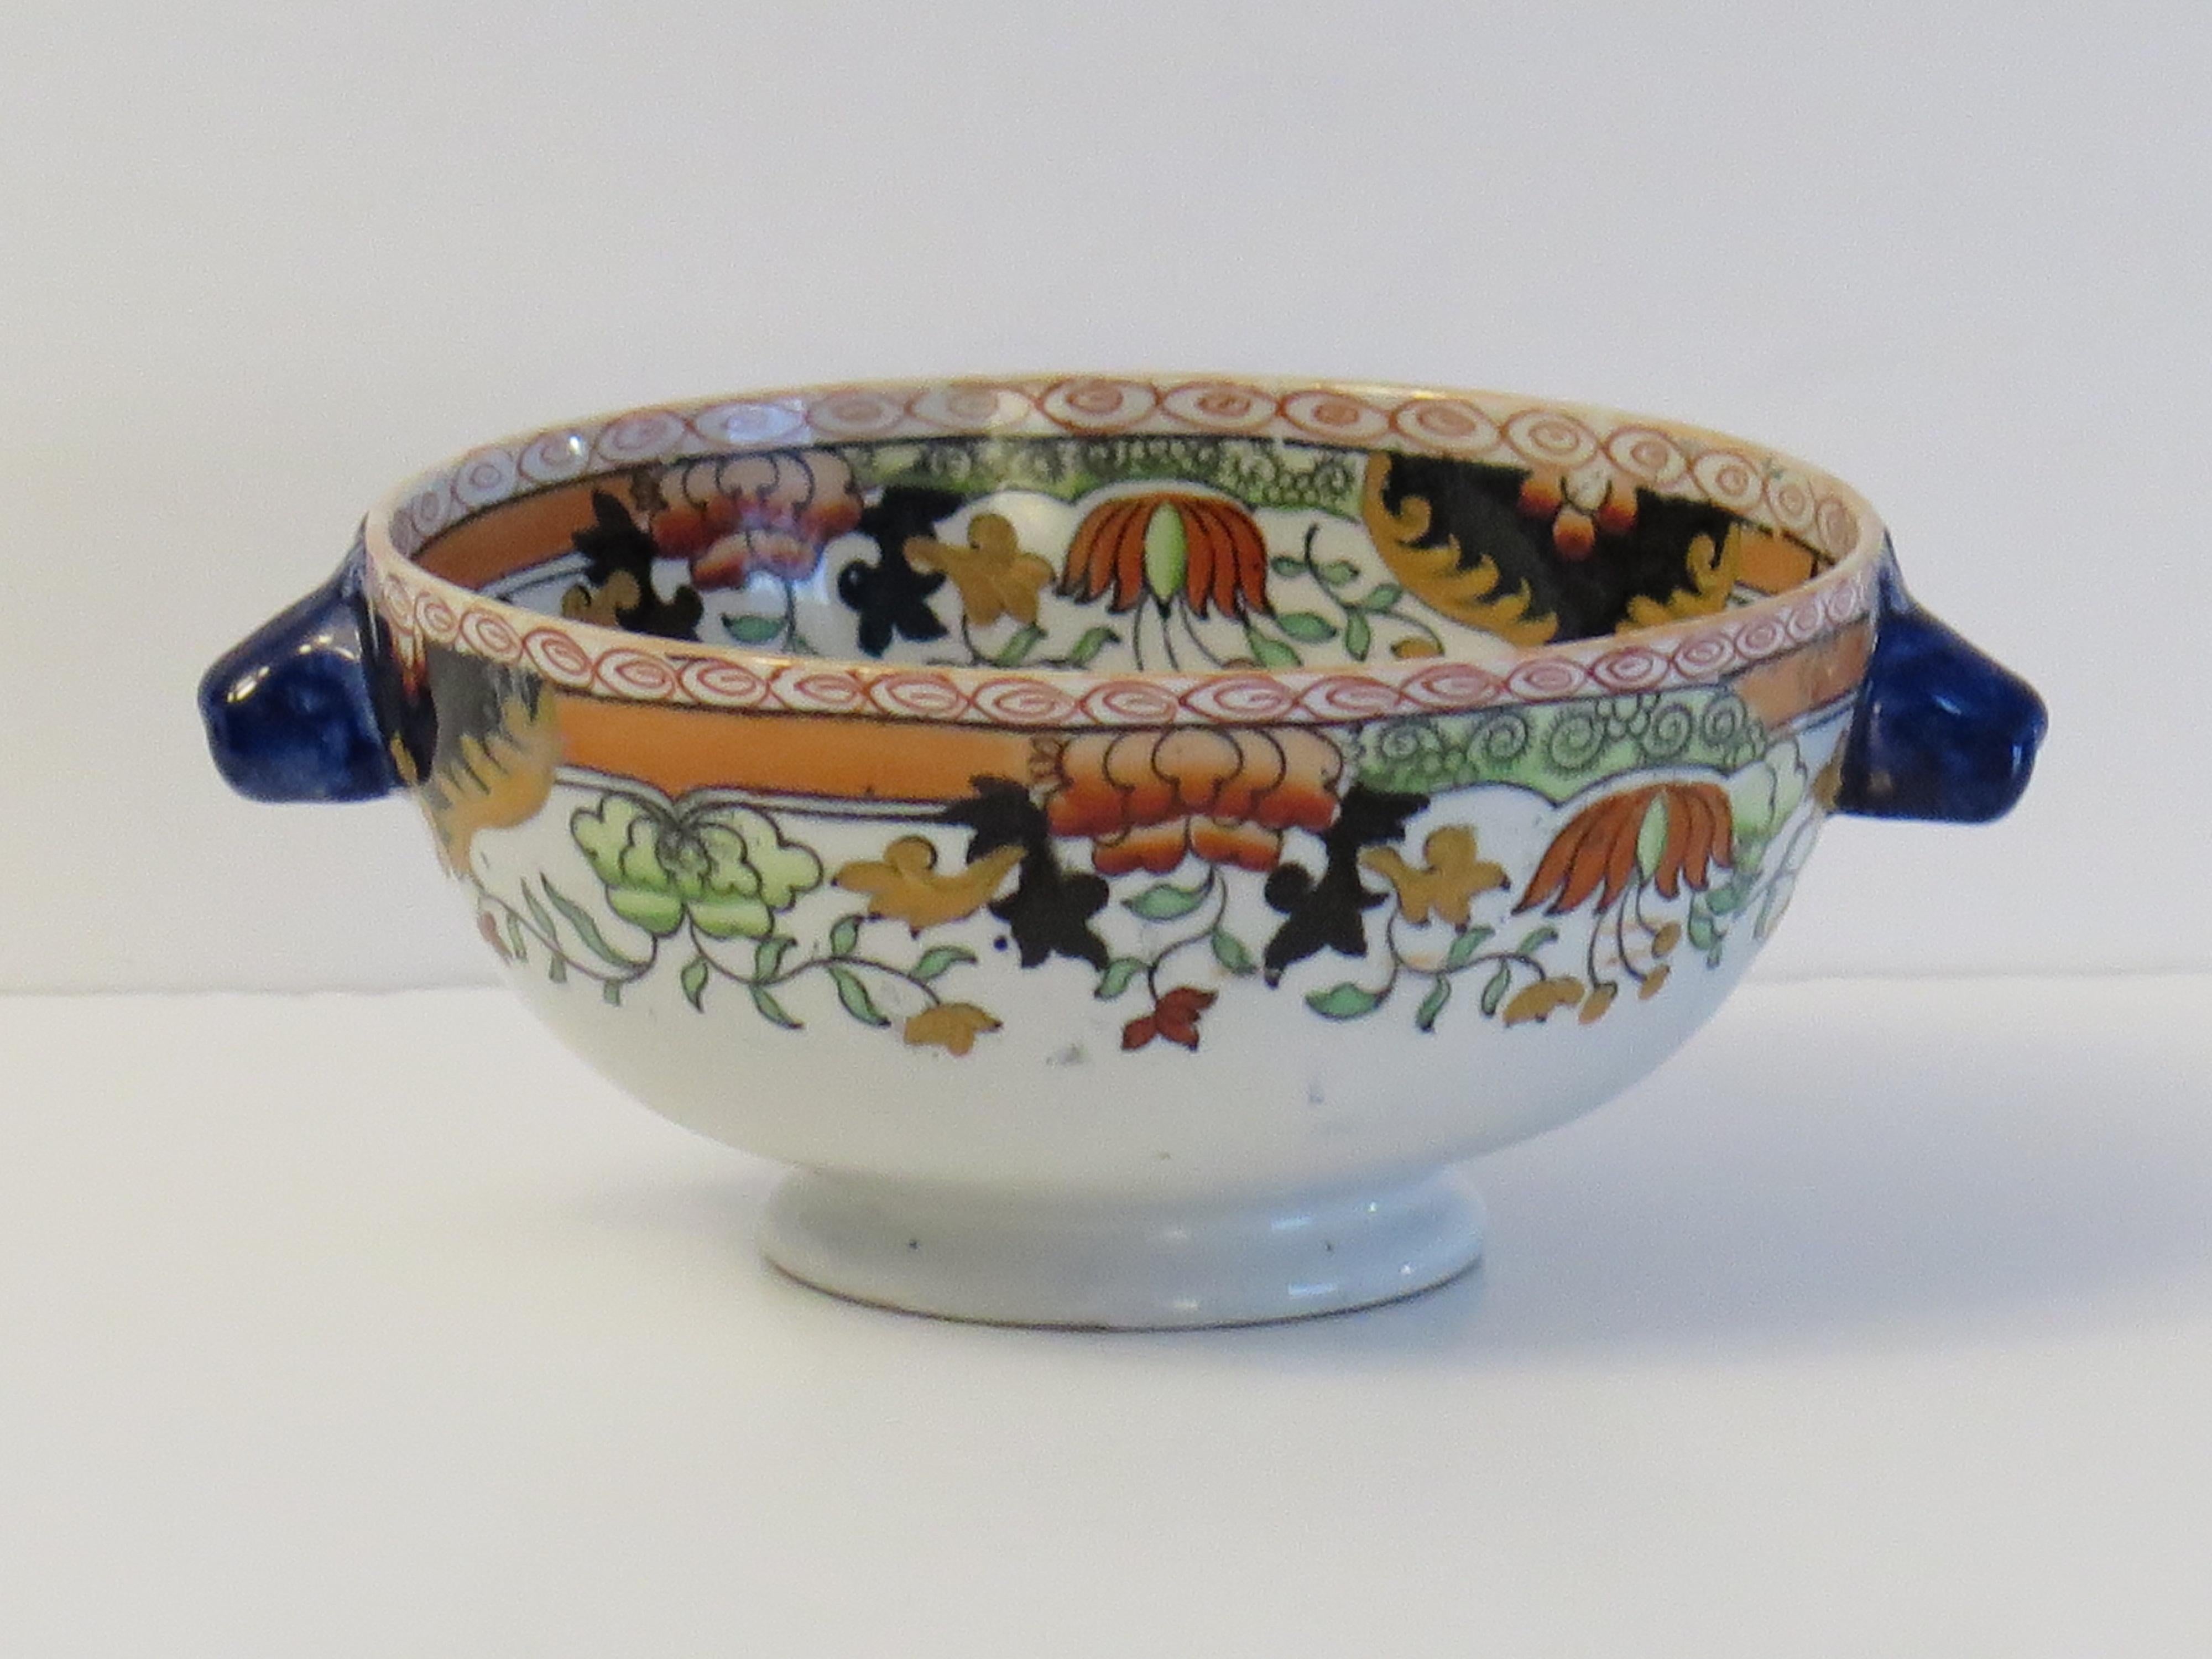 Masons Ironstone Bowl in Peacock Peony & Rock hand painted Pattern, circa 1838 For Sale 1